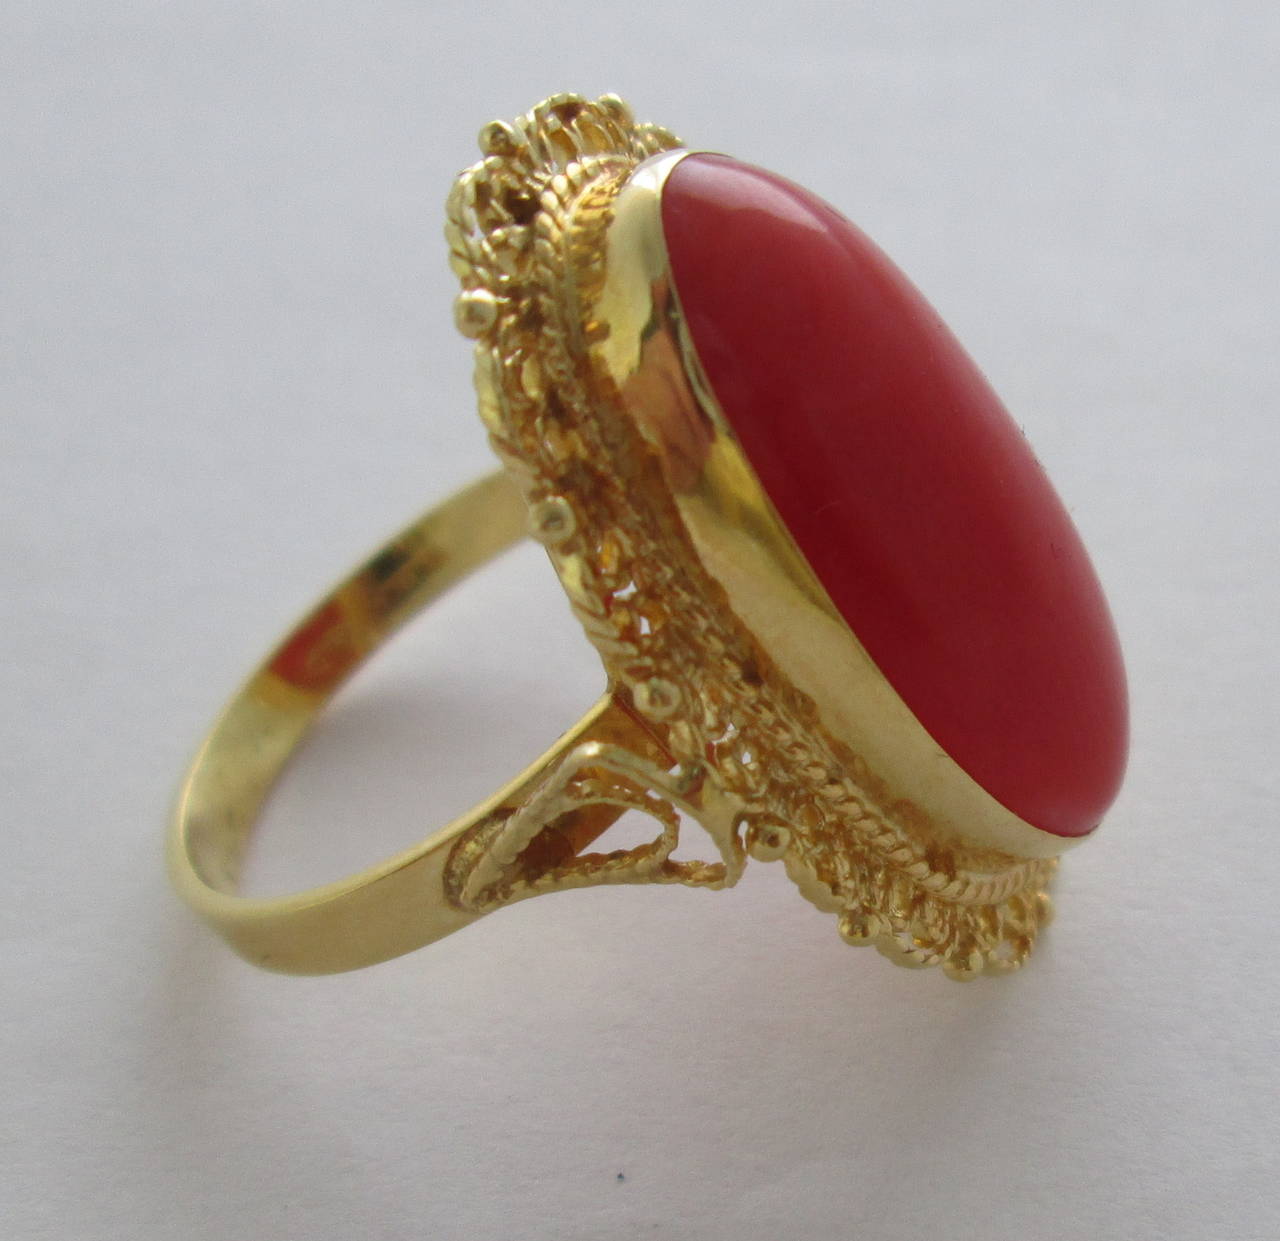 The collet set large smooth cabochon coral, approx 21 x 10 mm within an ornate filigree frame.

Mounted in 18Kt yellow gold

Finger size: 6 1/2

Weight: 6.2 gr